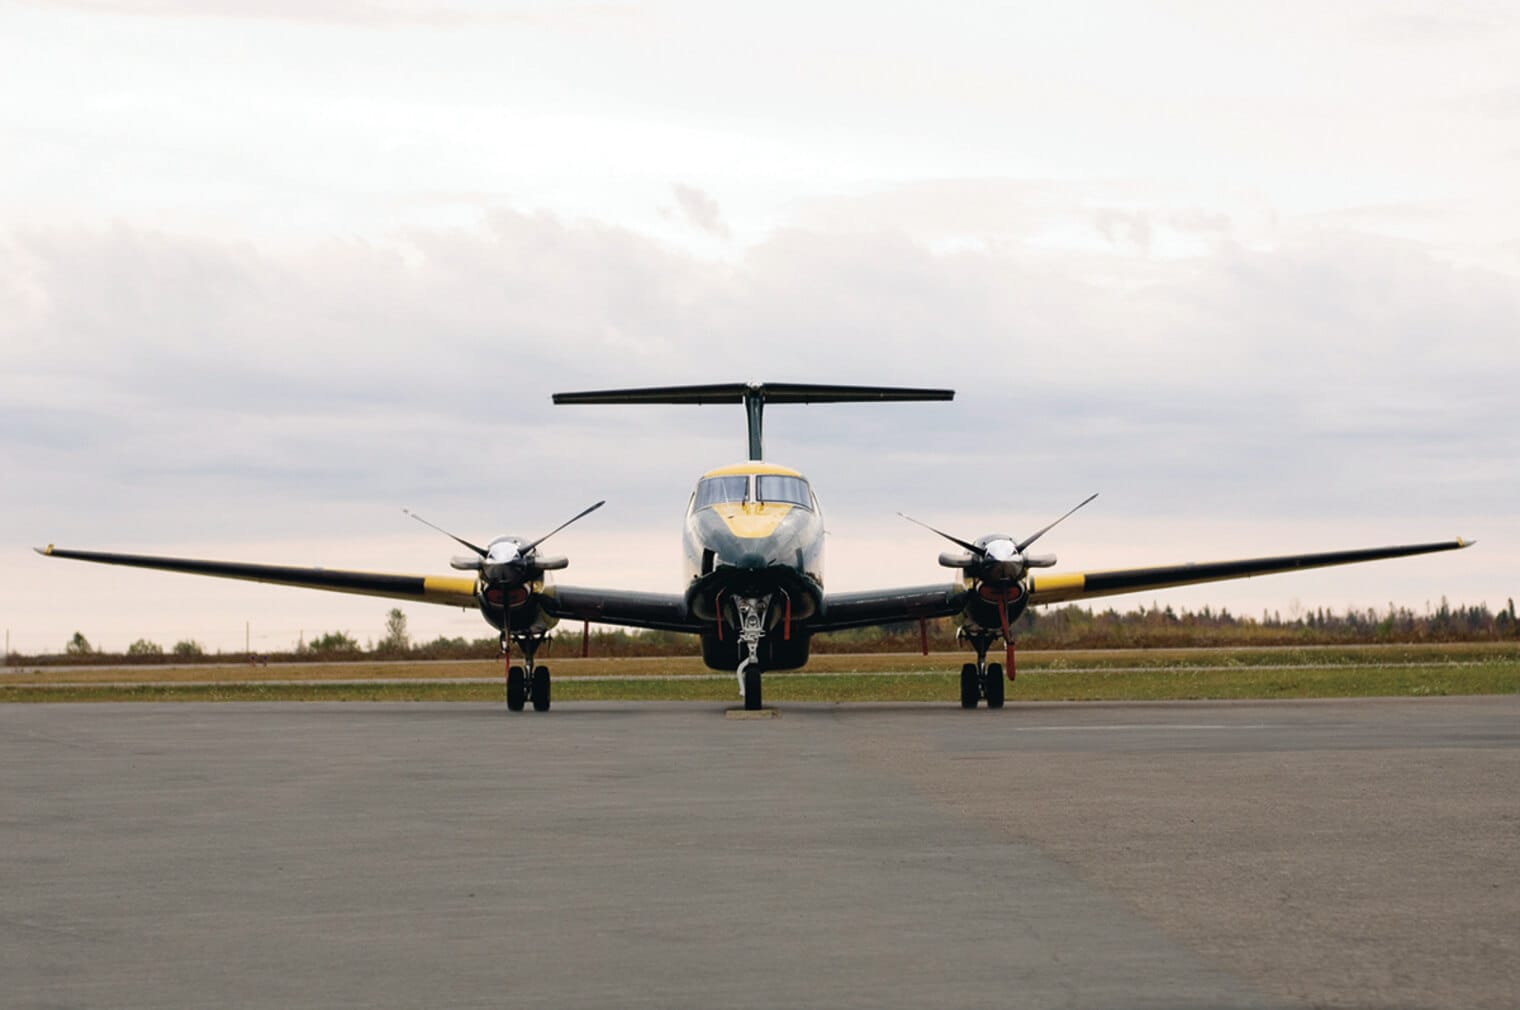 Photograph of DFO King Air 200